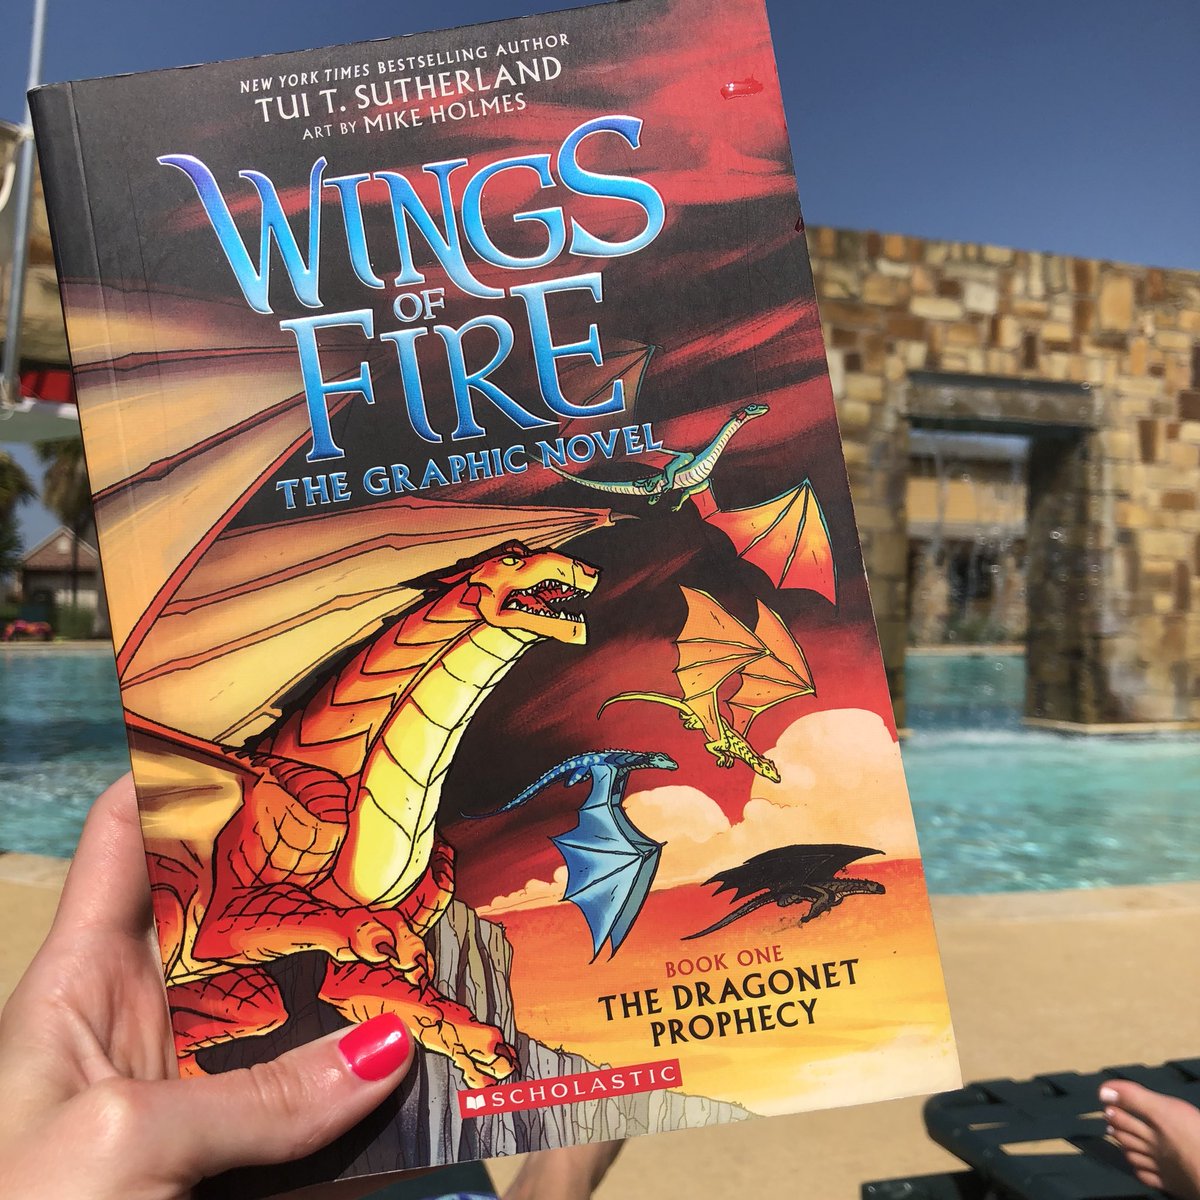 Really branching out of my “comfort zone” in reading this book. My students LOVE the series though and were crazy excited about it becoming a graphic novel. #growingreader #poolsidereads #teachersummerlife #wingsoffire #illletyouknow